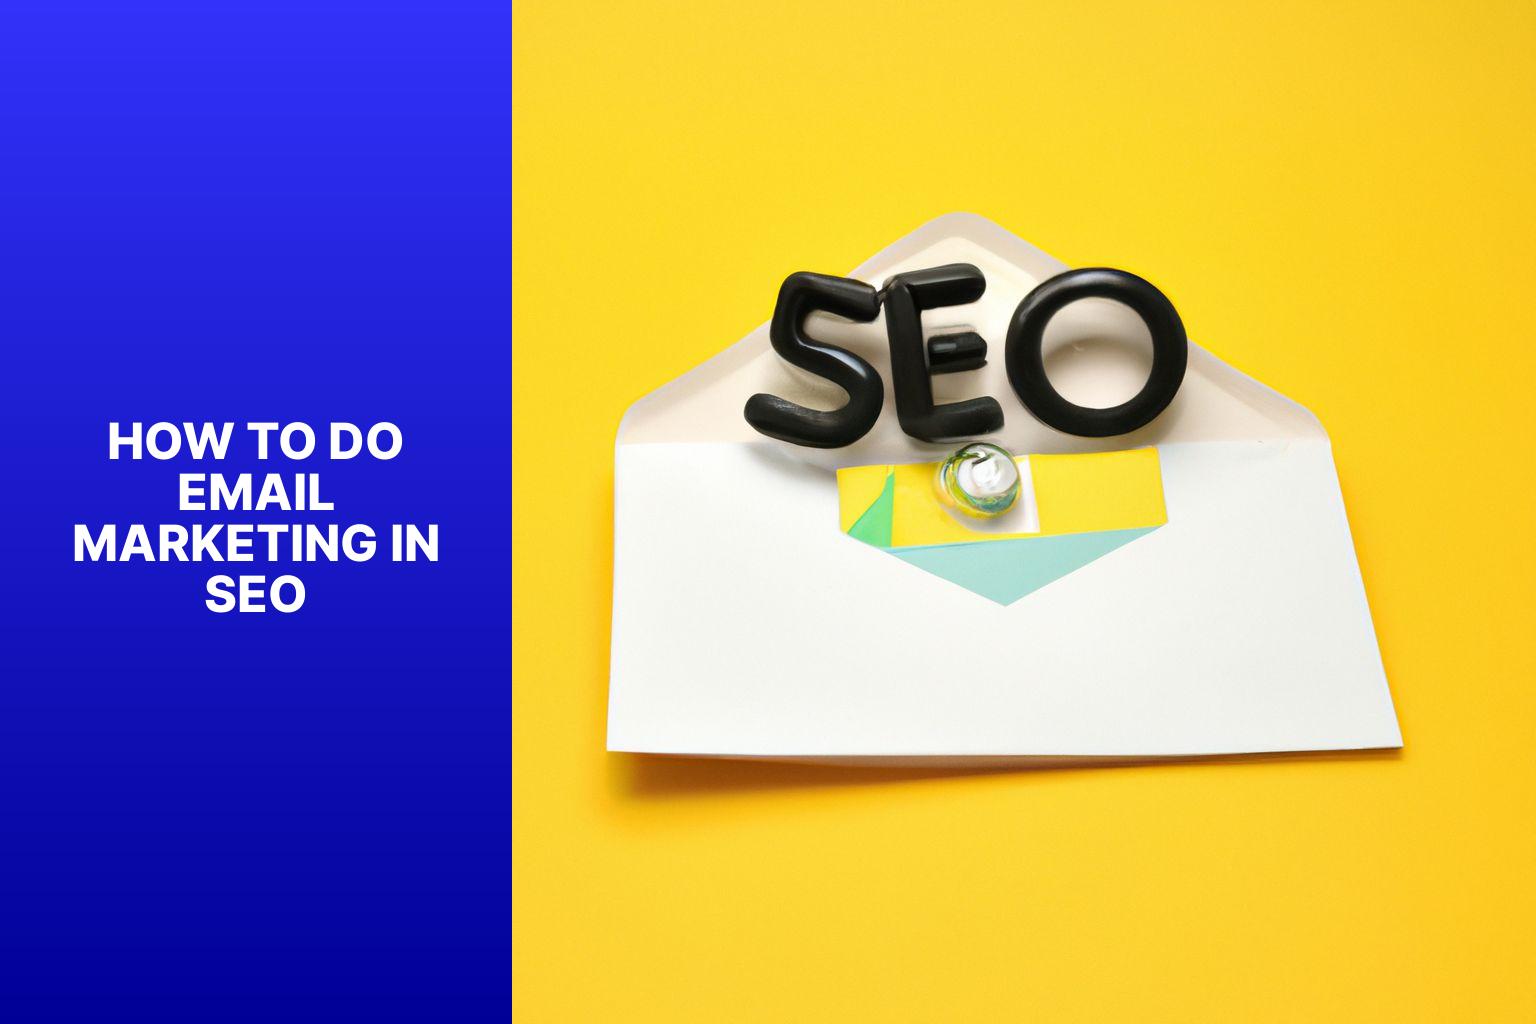 How to Do Email Marketing in SEO